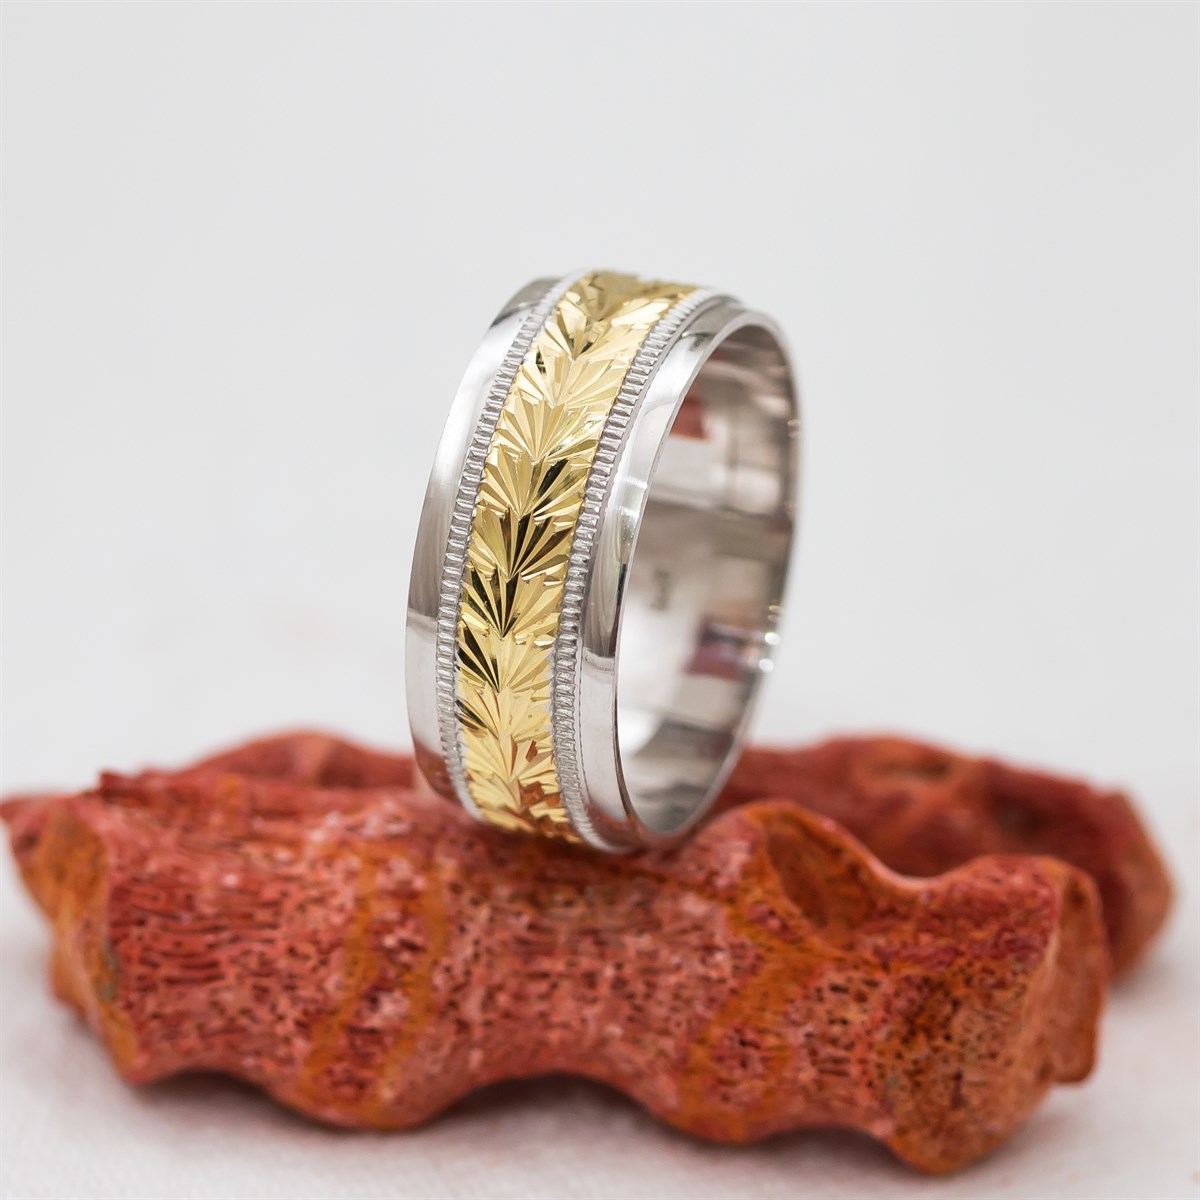 Unisex Silver Wedding Ring with Iridescent Center